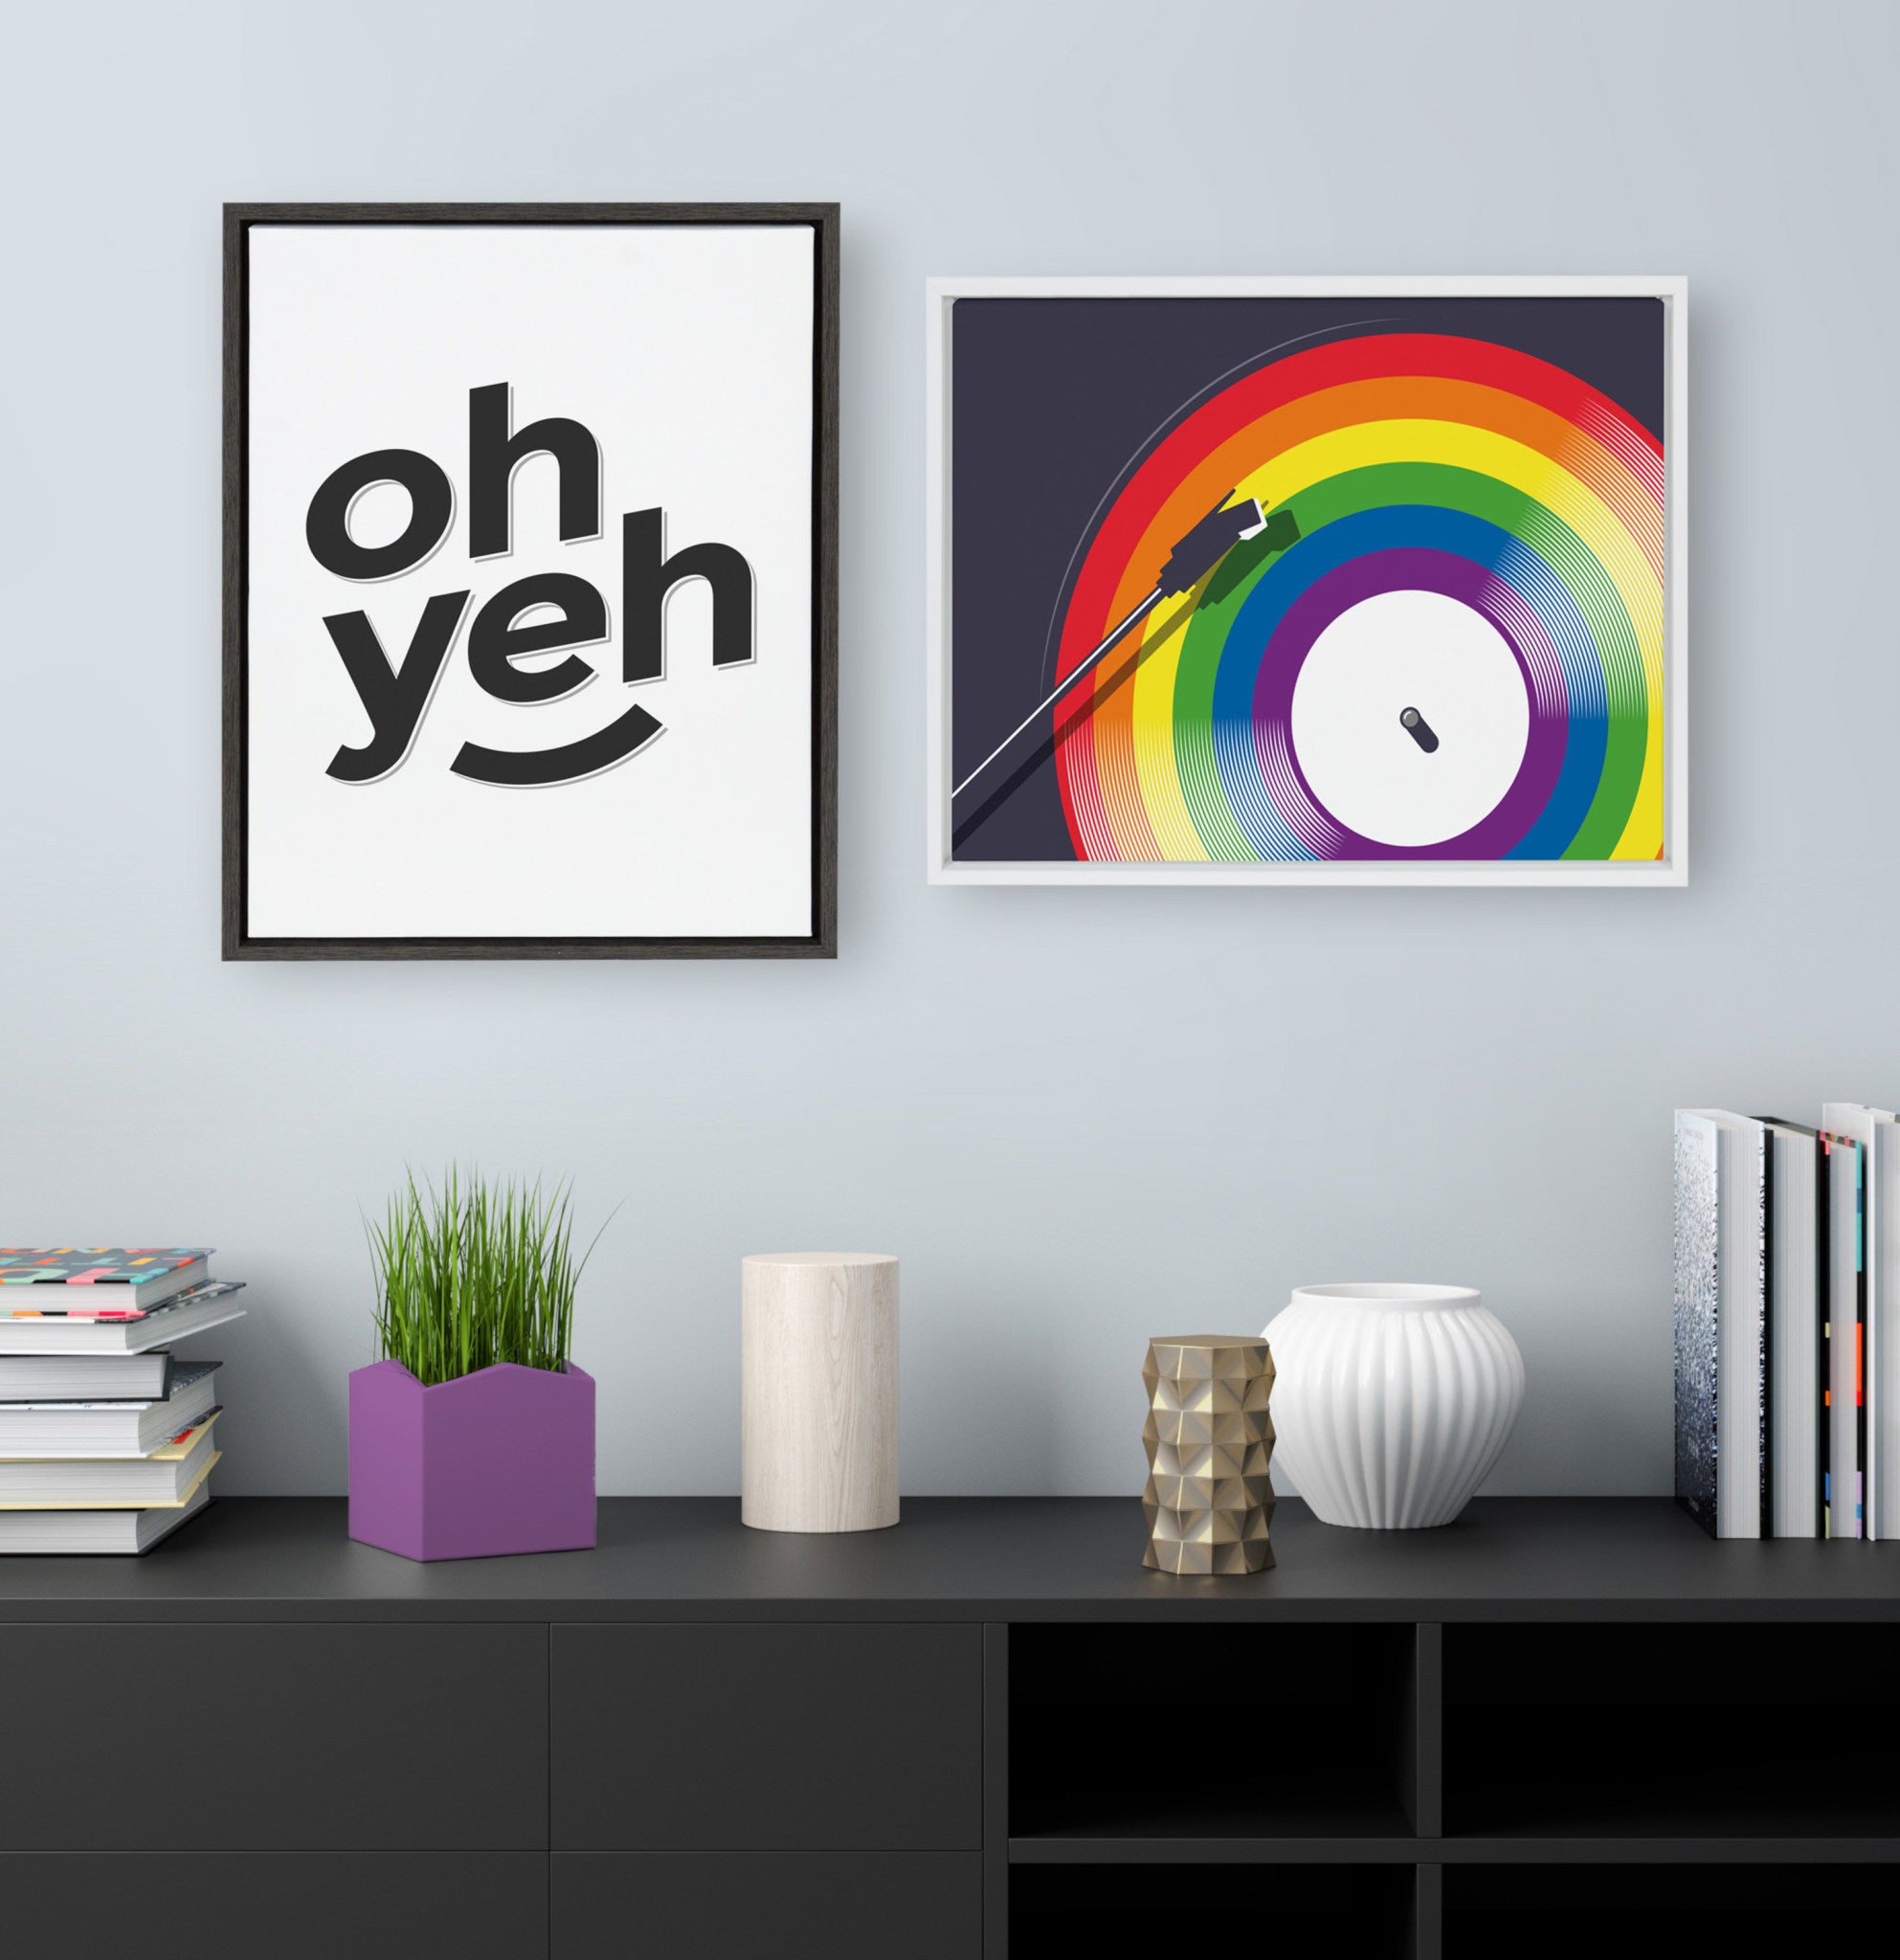 Sylvie Oh Yeh Framed Canvas By Rocket Jack